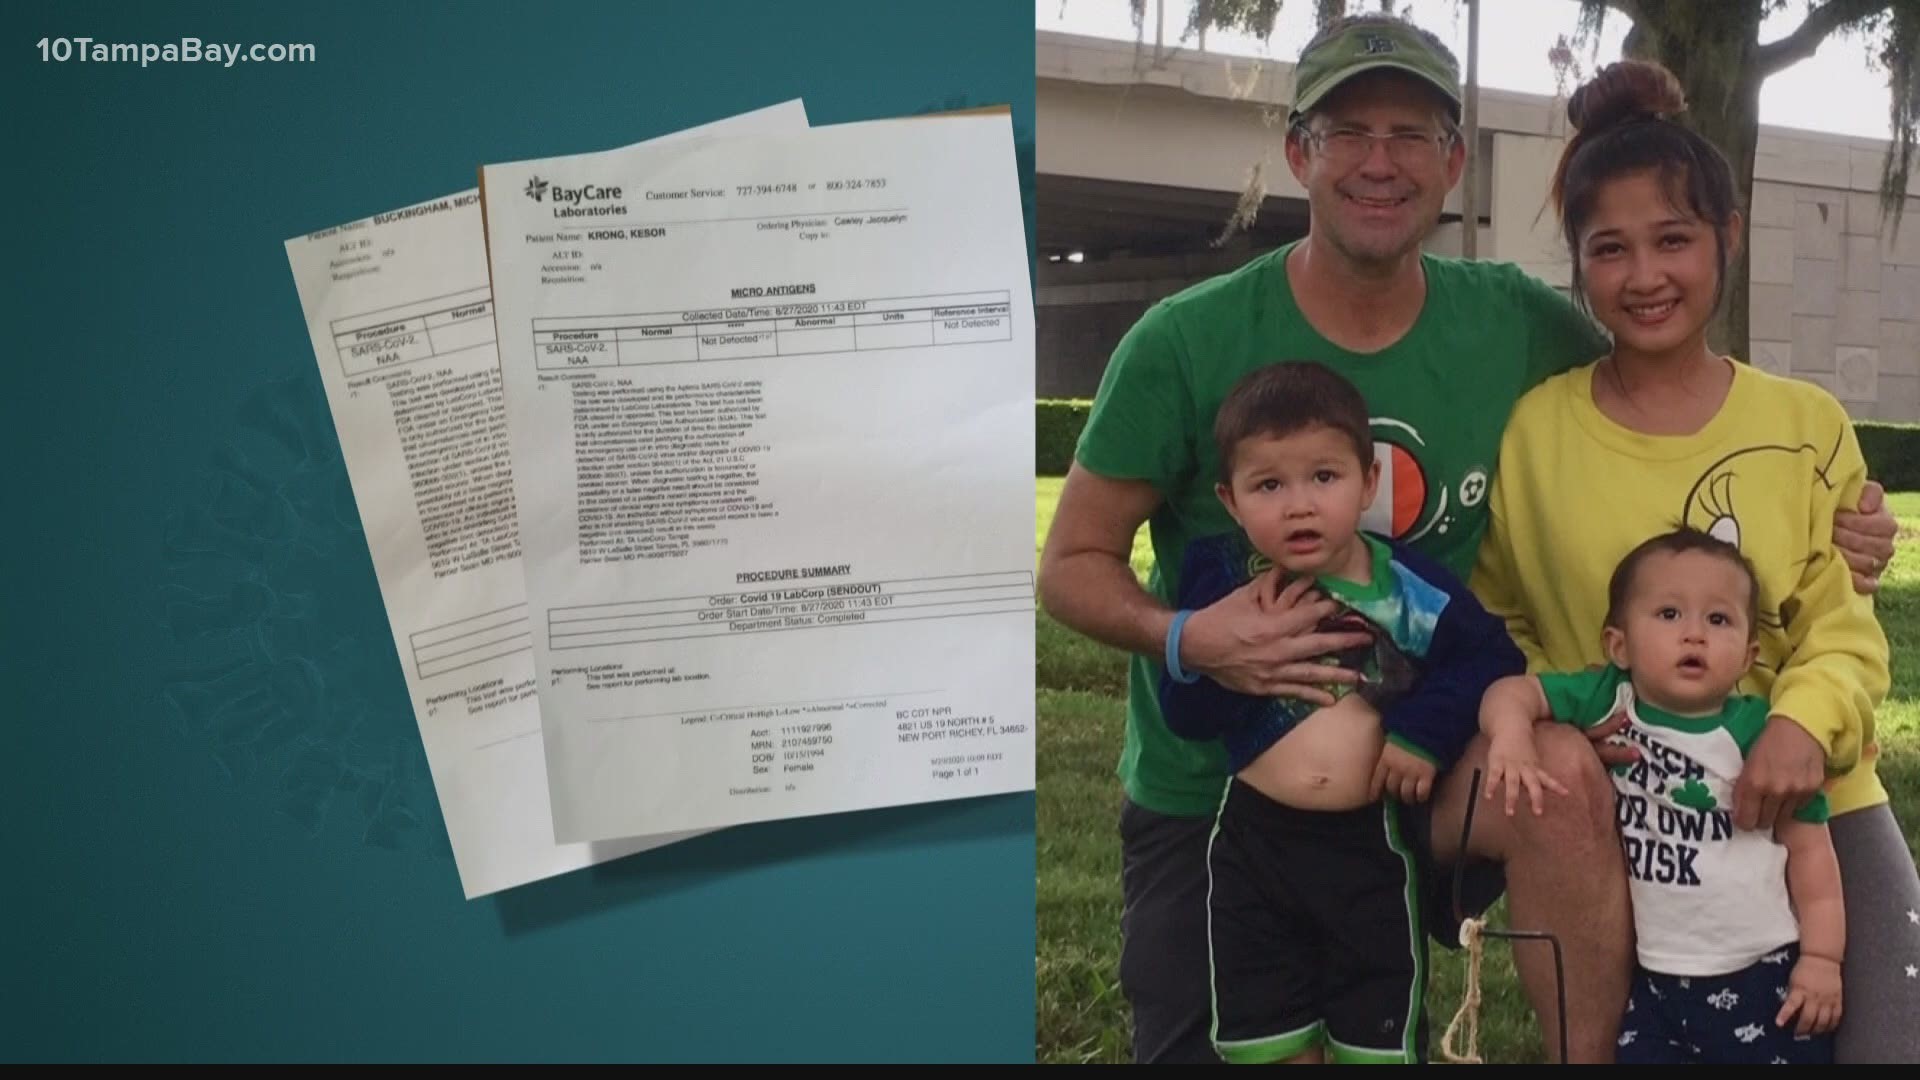 A delay in testing results caused a Pasco County family to miss an international flight.